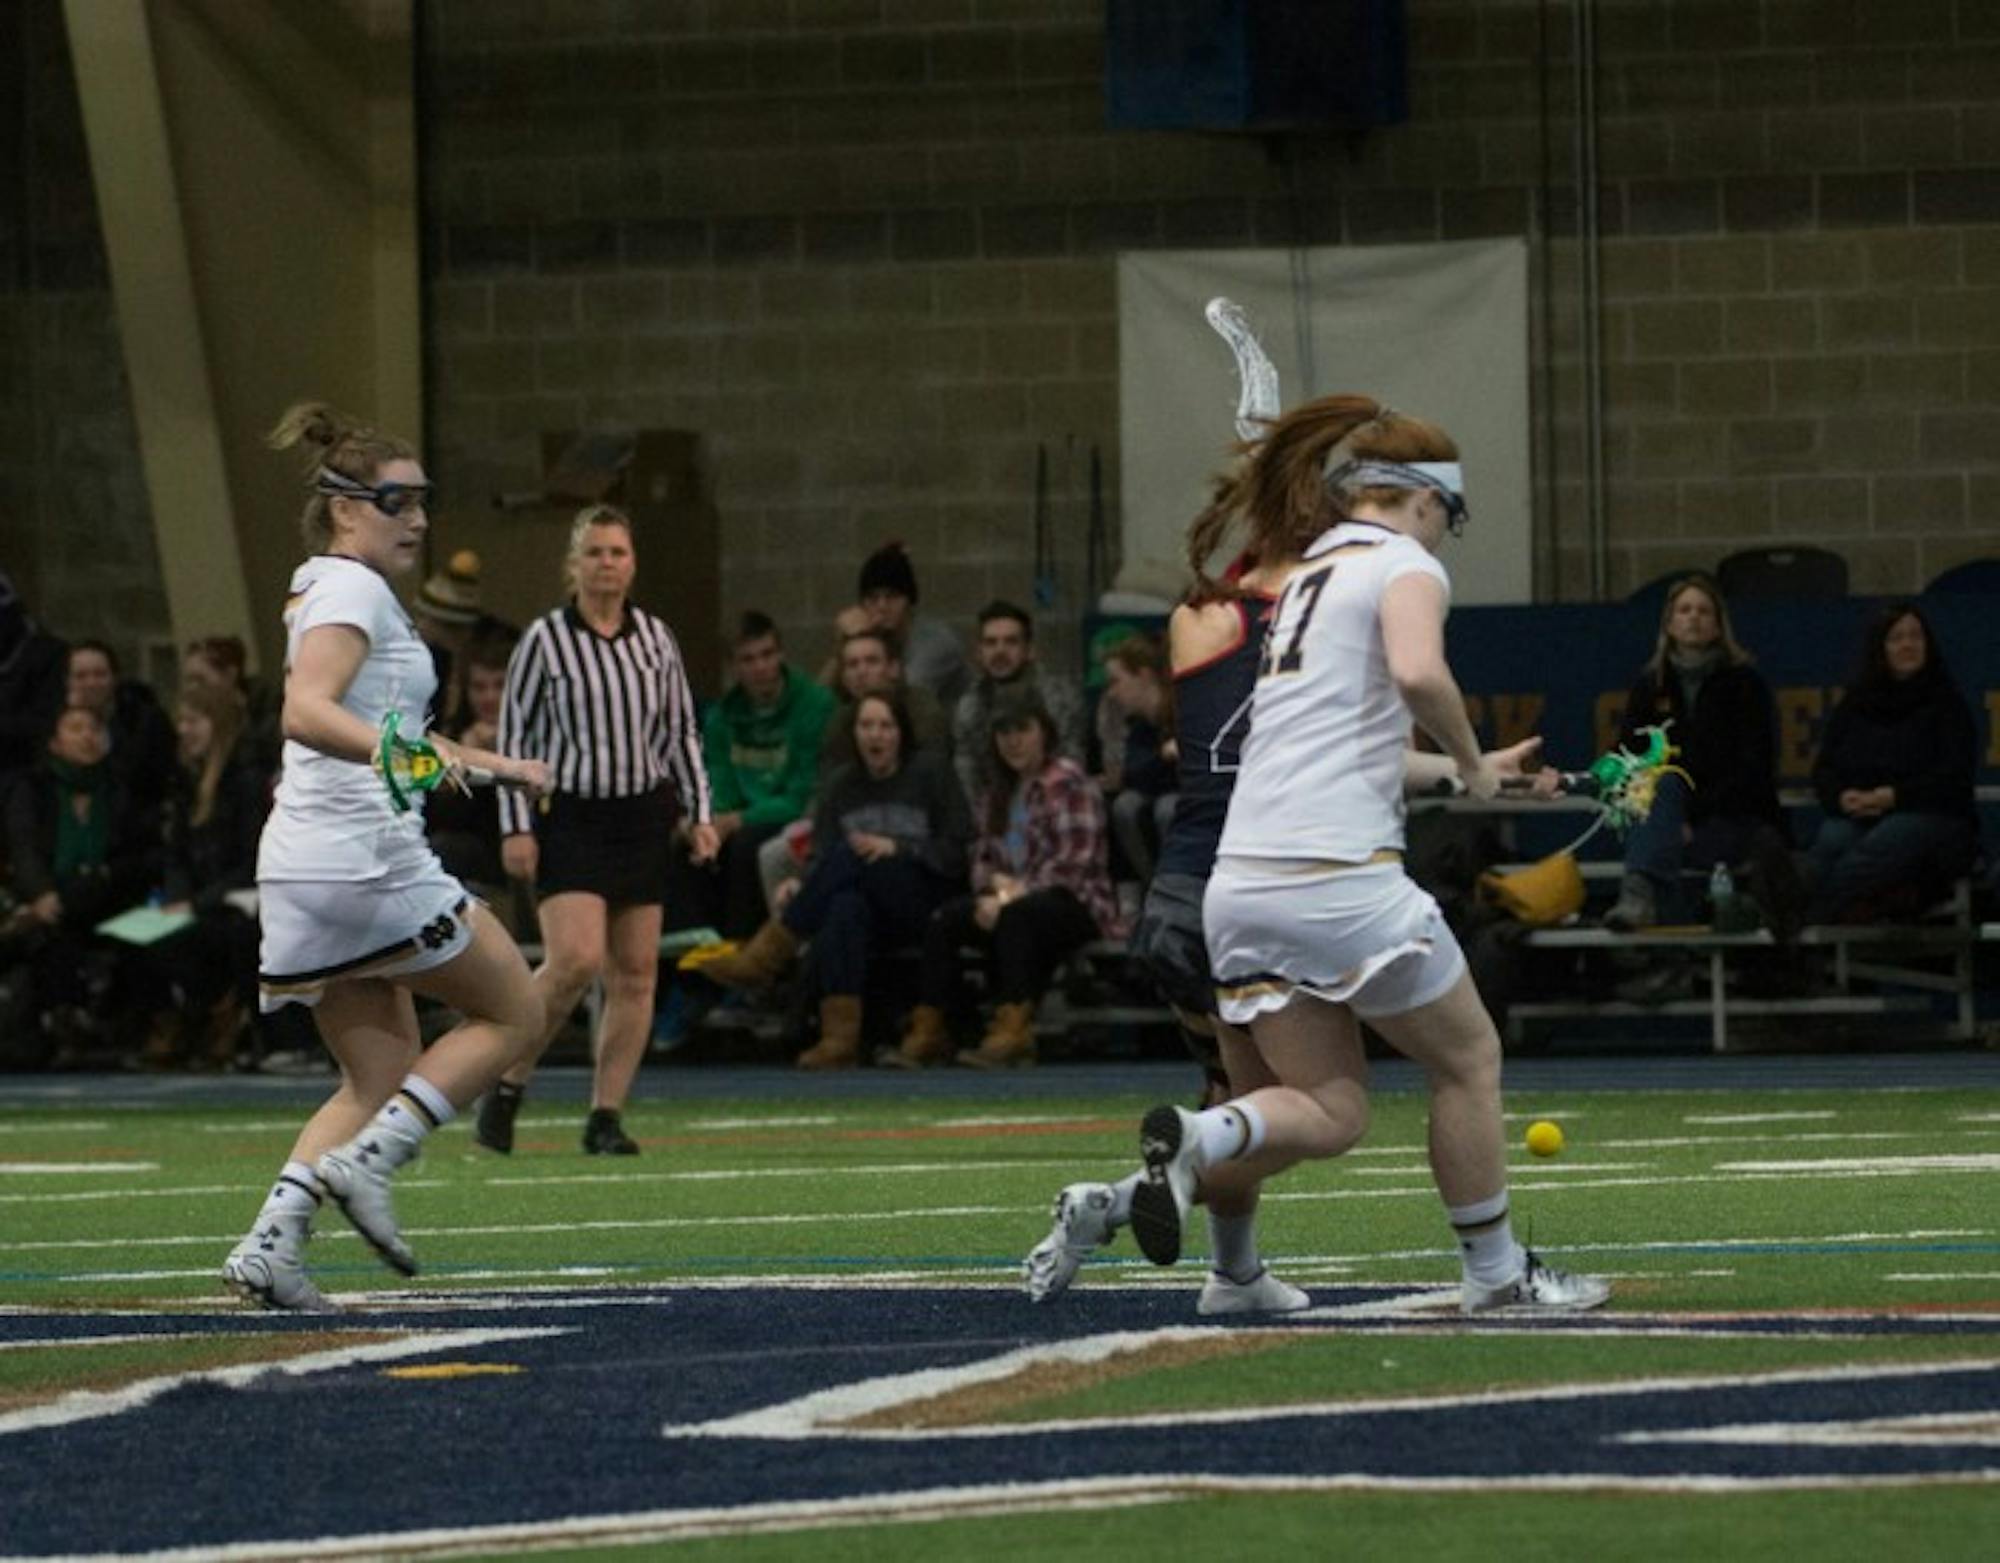 Irish senior defender Barbara Sullivan, right, chases after a ground ball during Notre Dame’s 17-5 win over Detroit on Sunday at Loftus Sports Center. Sullivan is this year’s team captain.